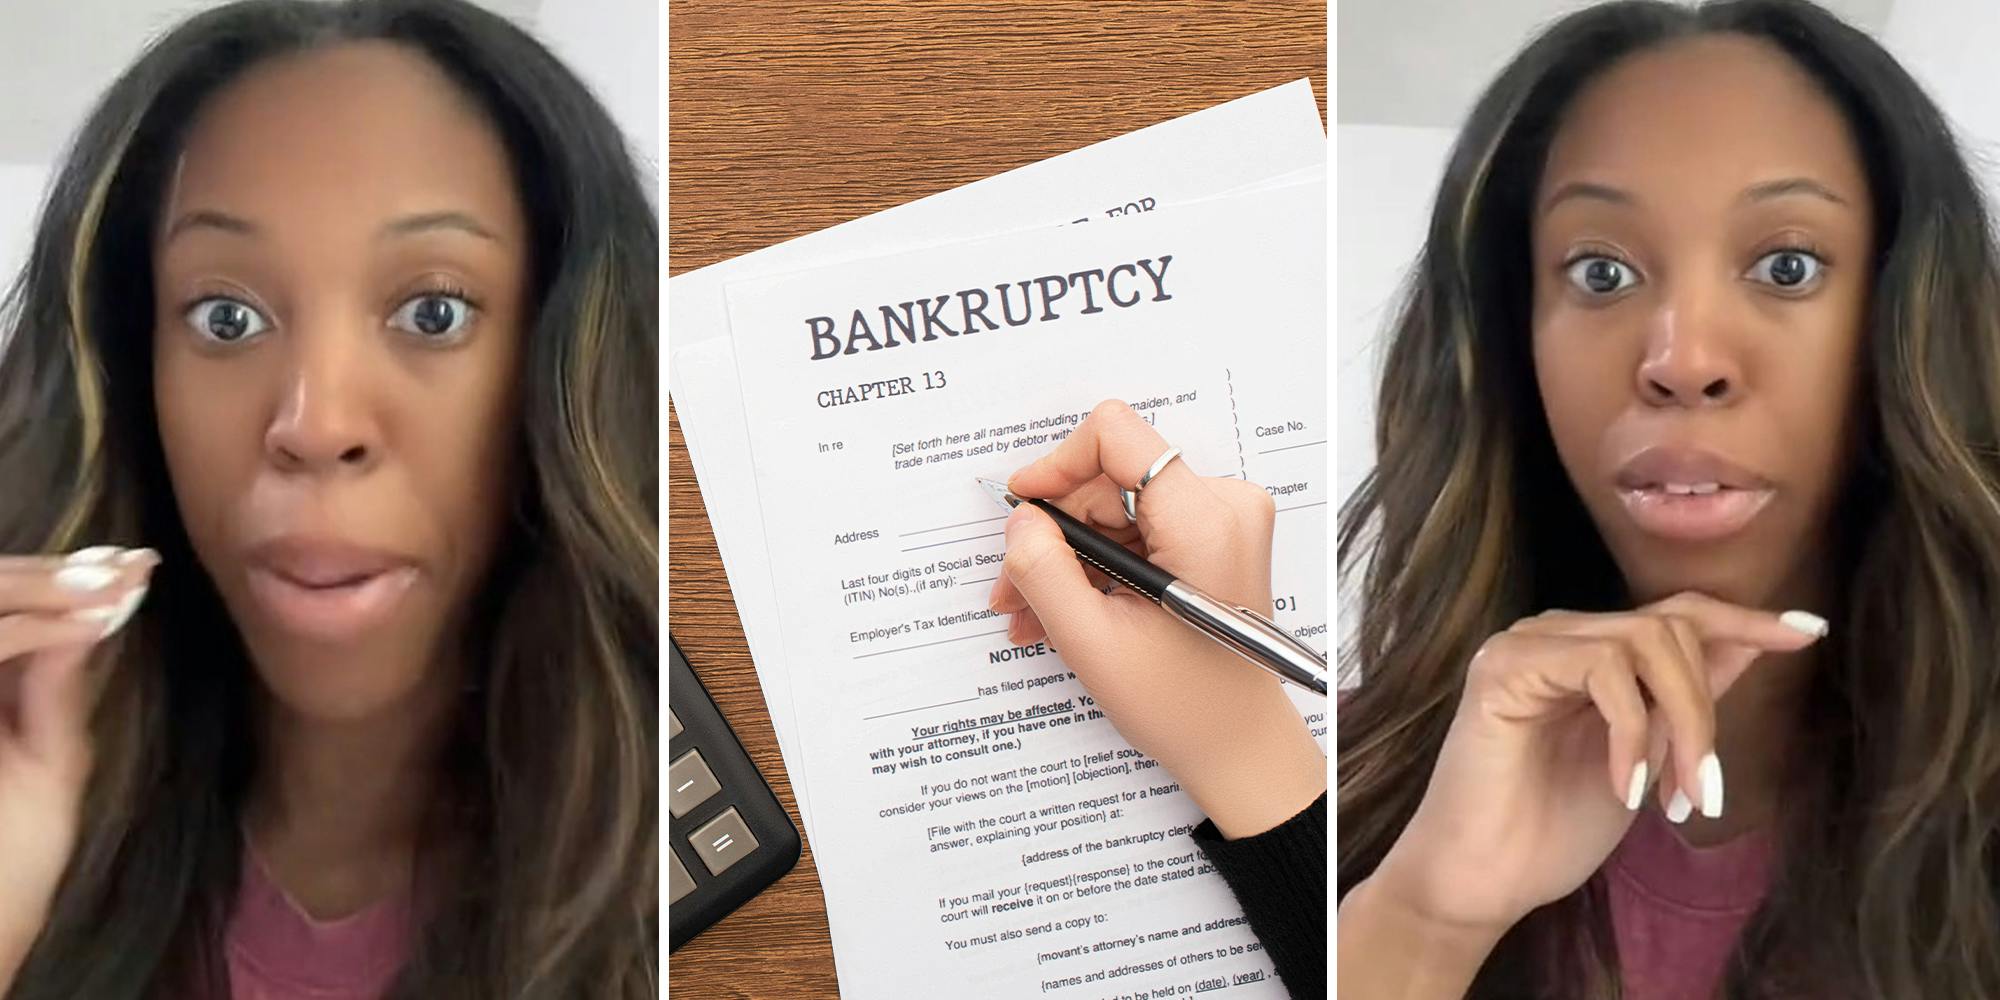 Woman encourages people who can’t afford their cars to file for bankruptcy